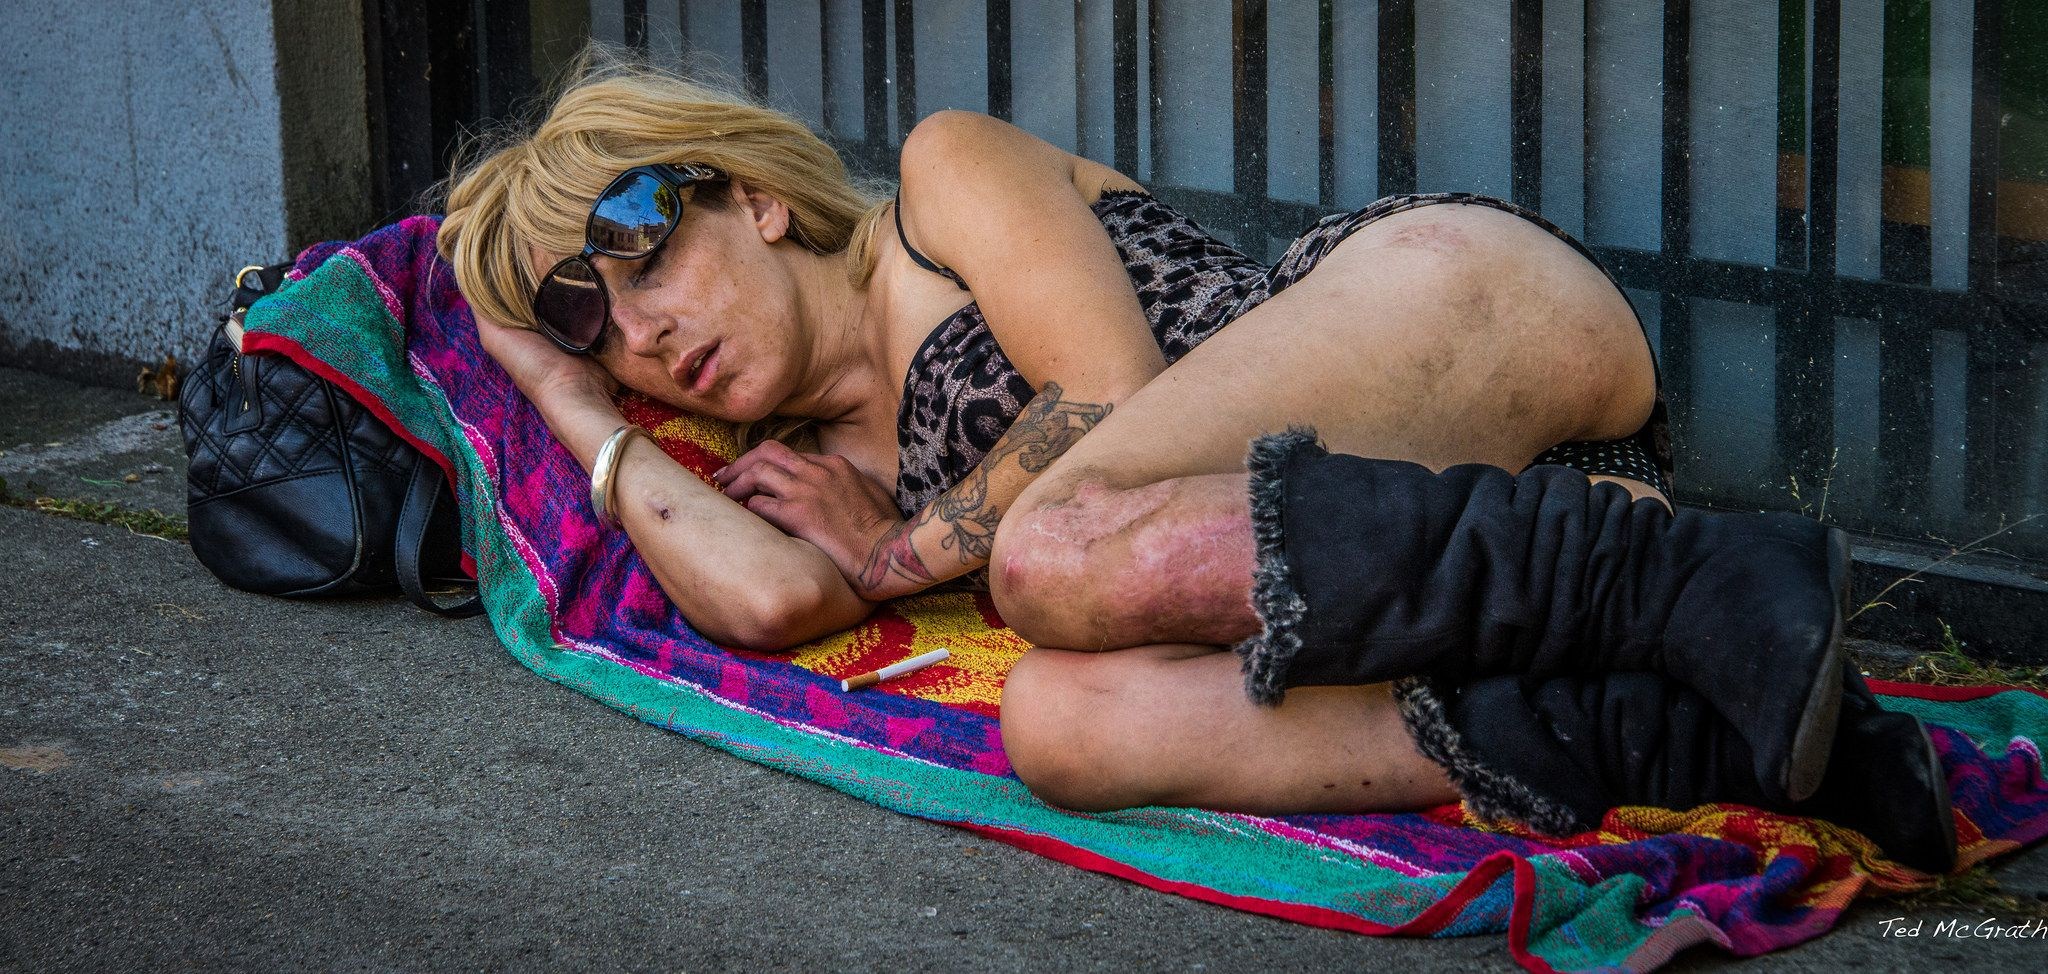 Fucking a Drunk Homeless Woman in Close-Up (81 photos) pic